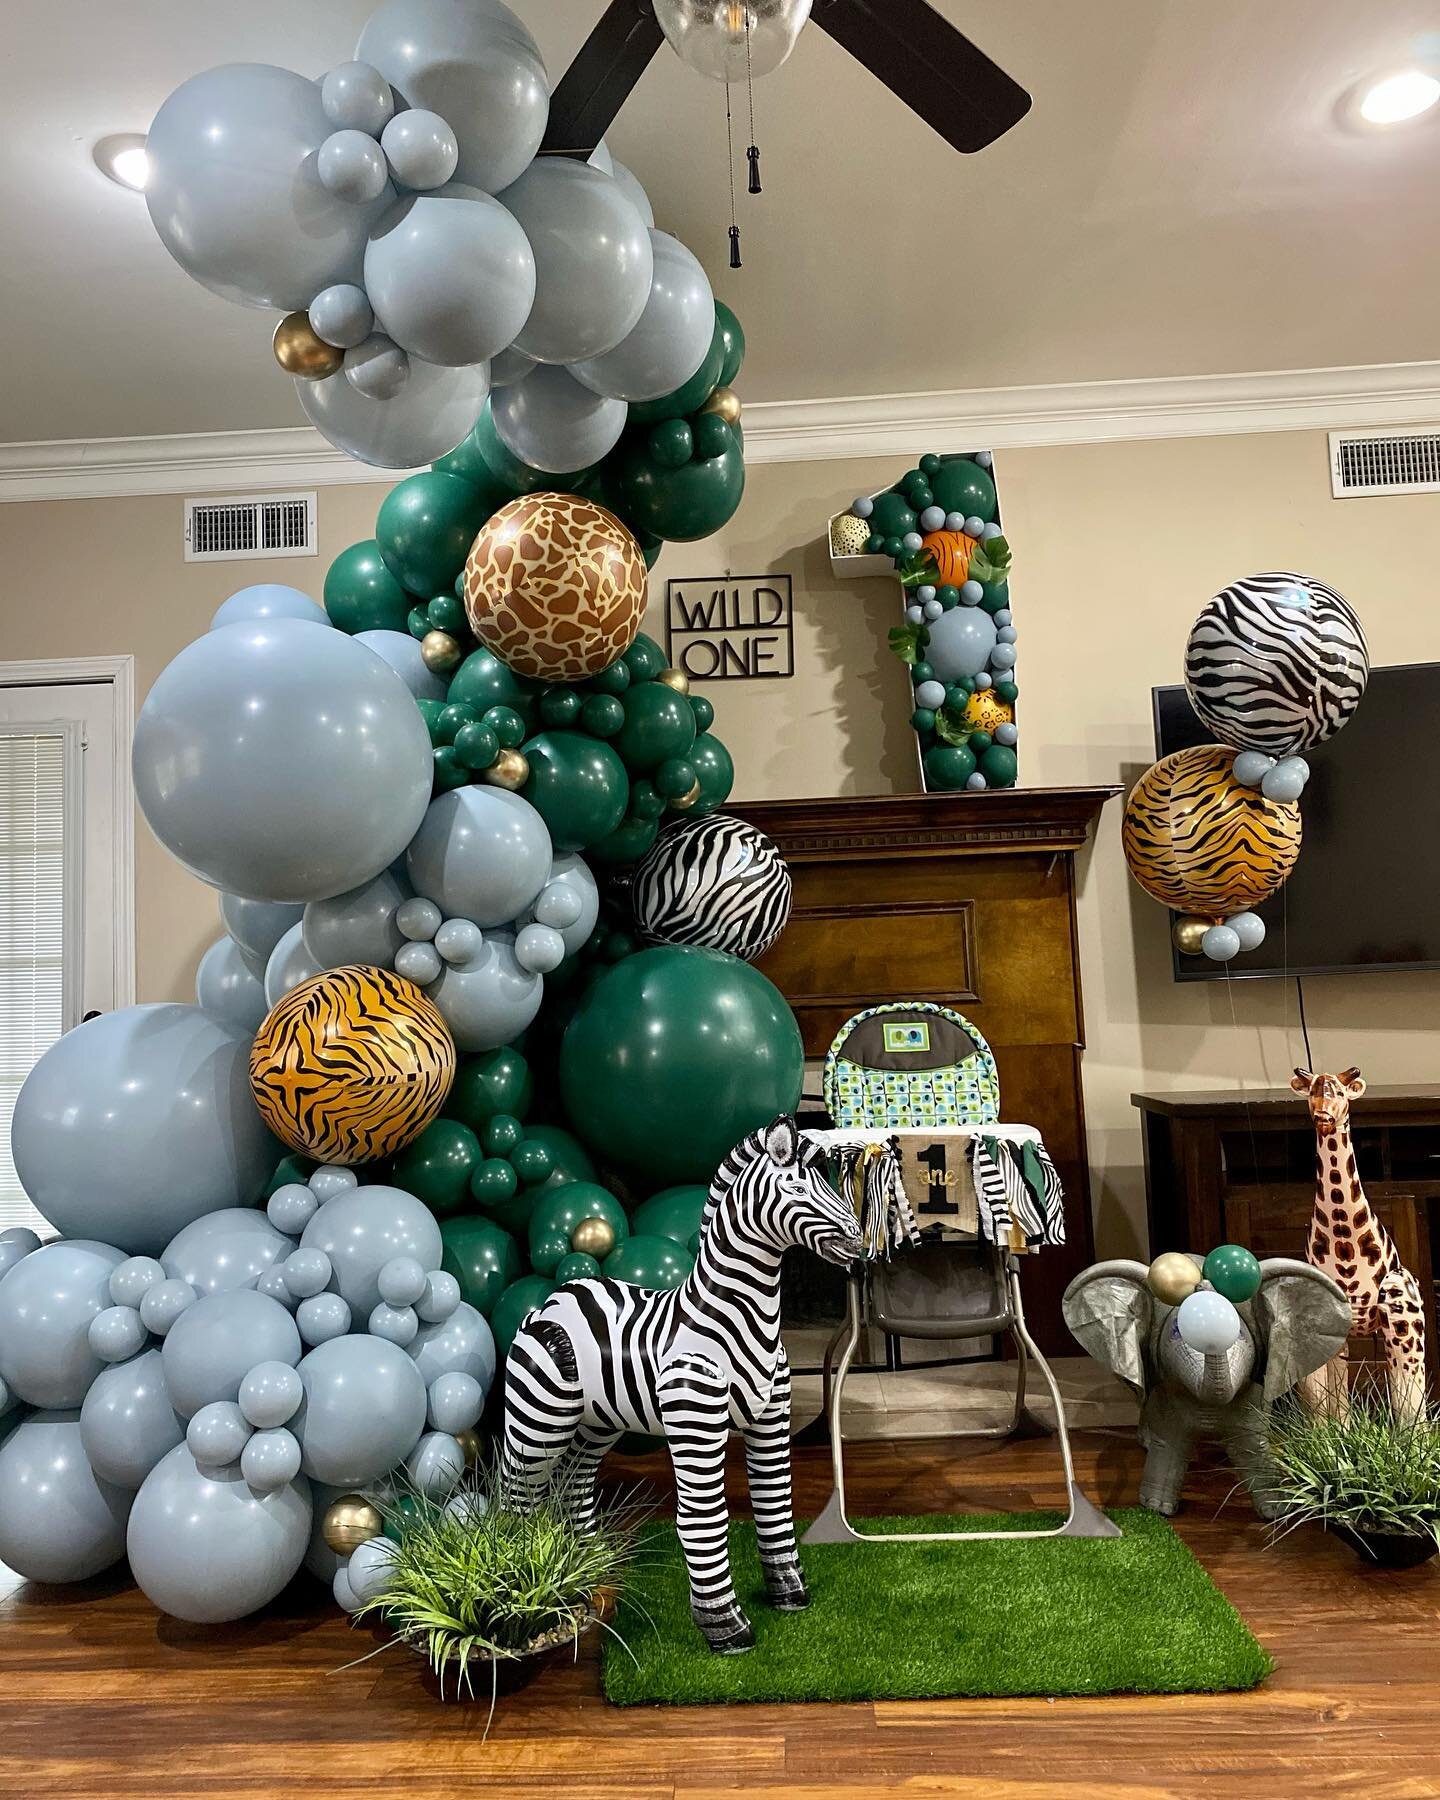 Oh boy! We have a WILD ONE! 💙🌴🦒🦓

Book the ultimate backdrop for your party! Any theme and we can create it!!

Call/txt 601-706-9010
www.babaloonz.com